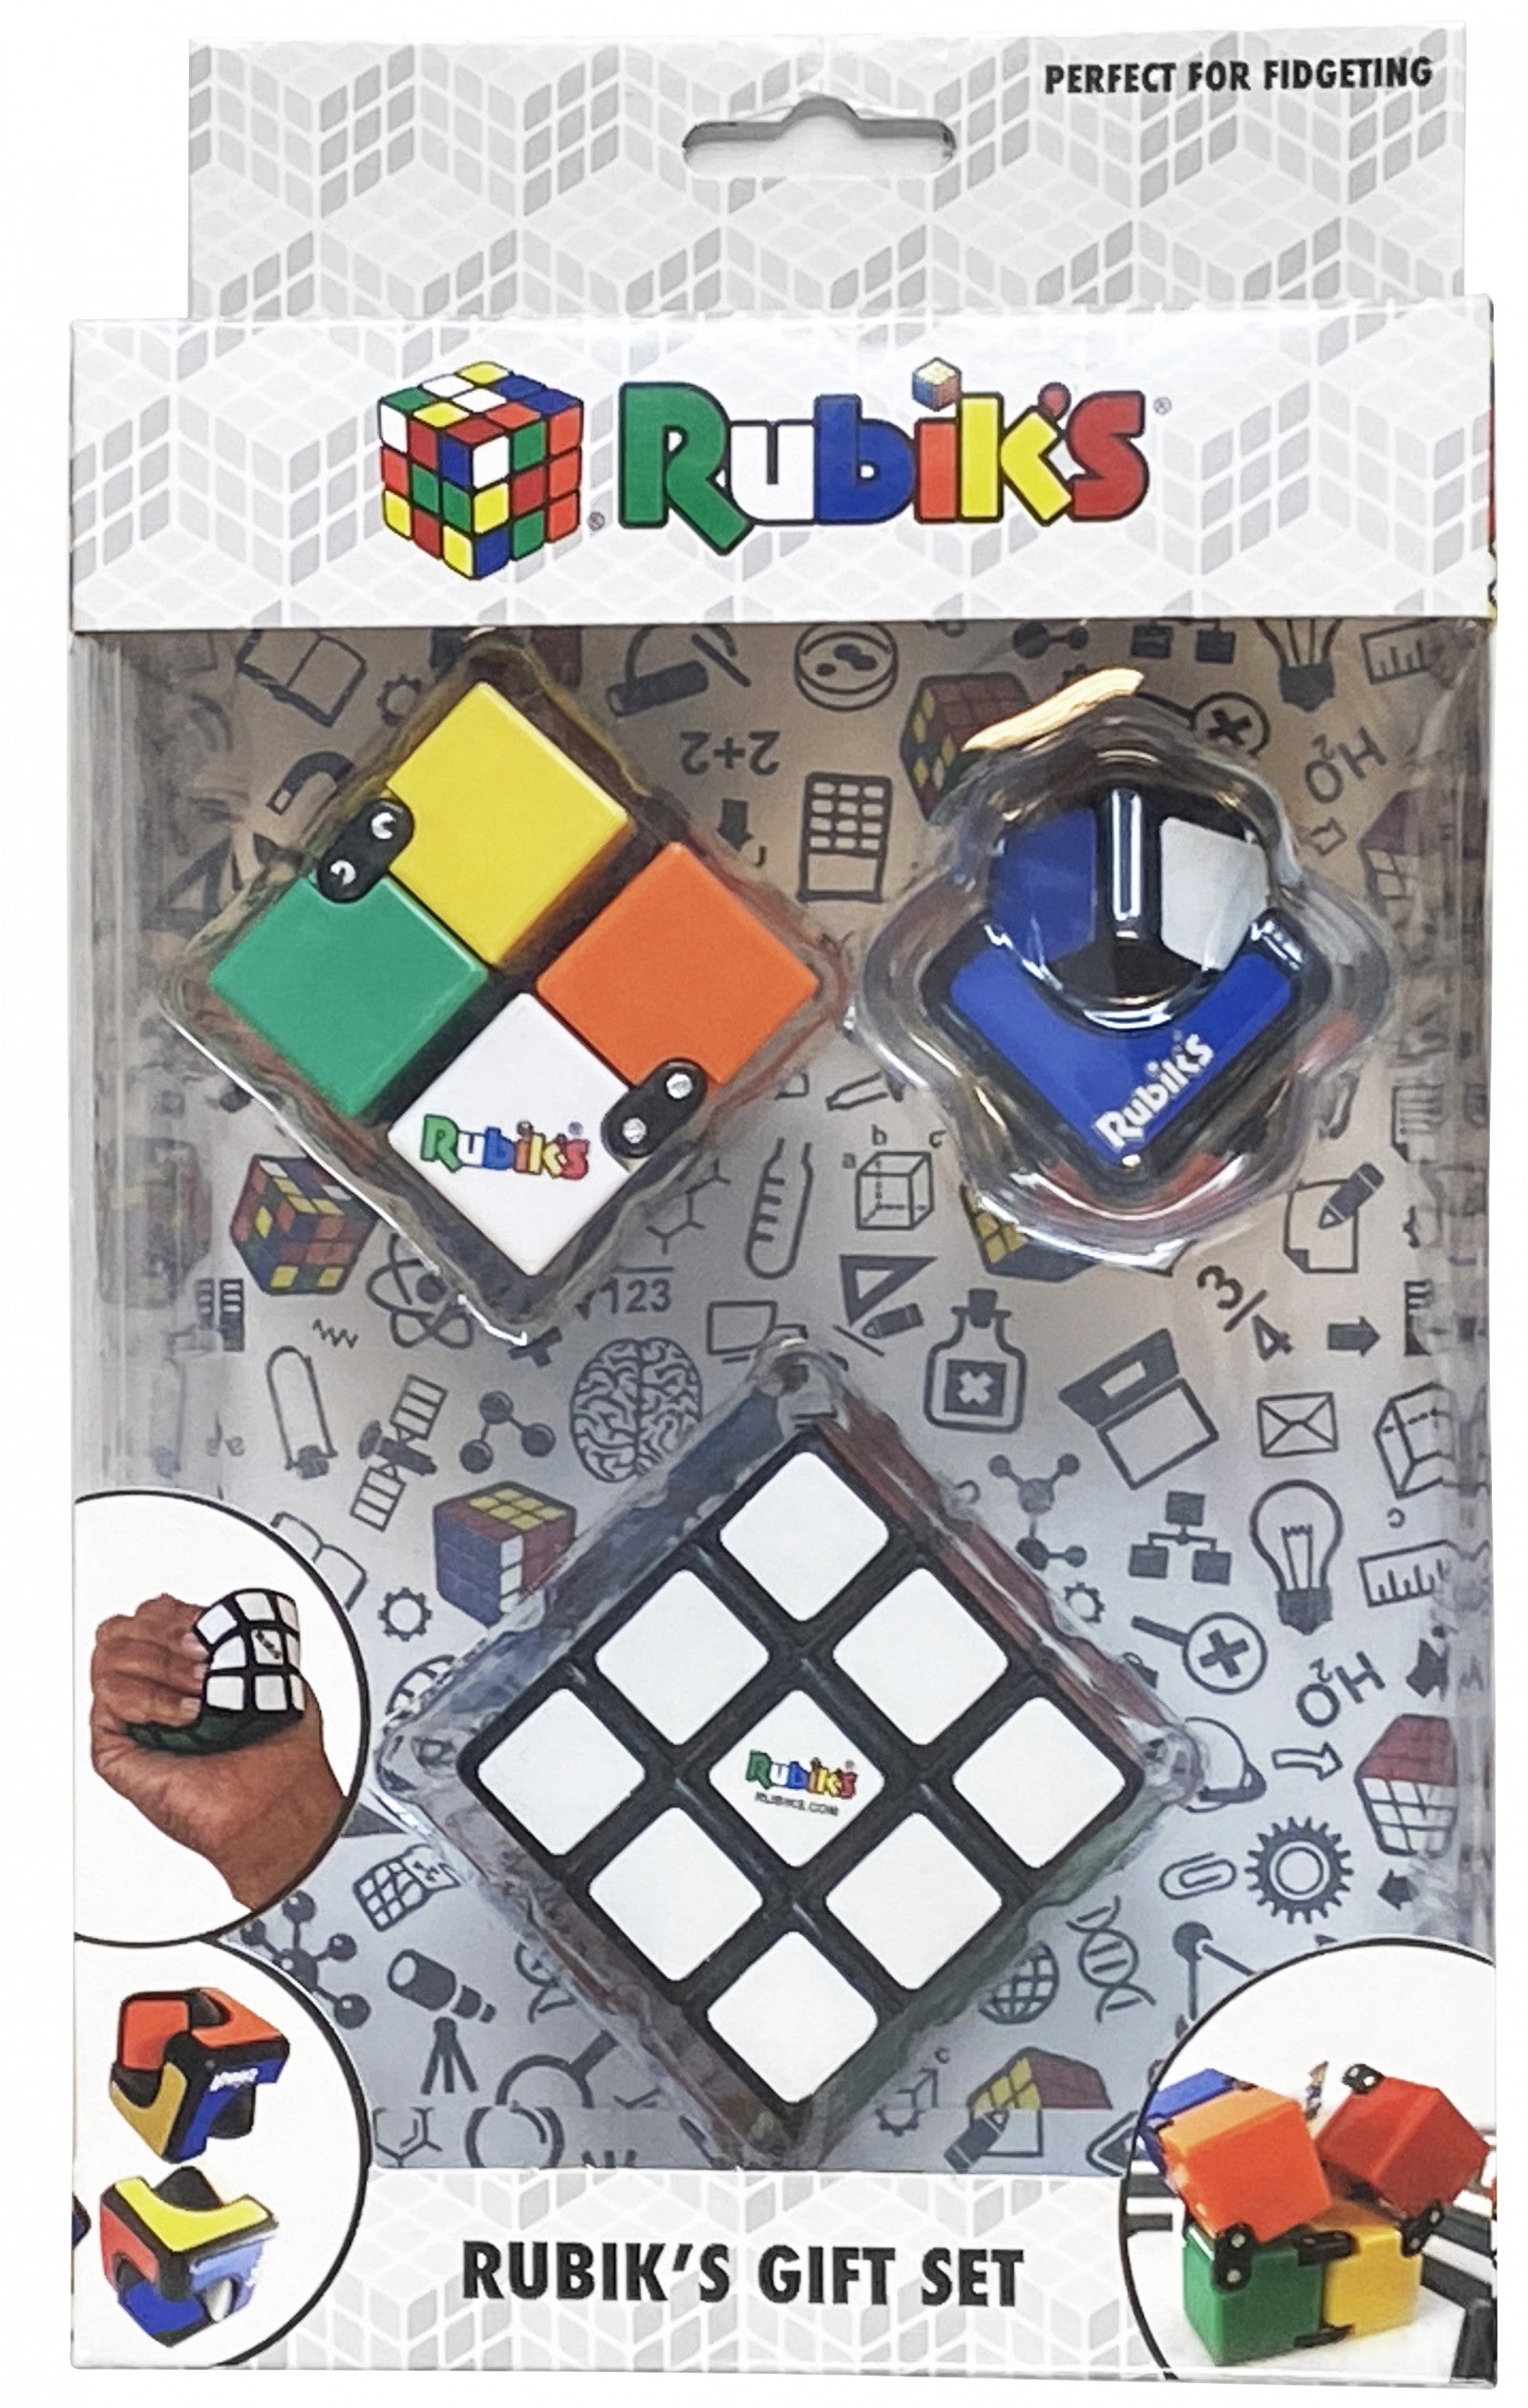 Rubiks Gift Set (Infinity Cube, Squishy Cube, Spin Cubelet)